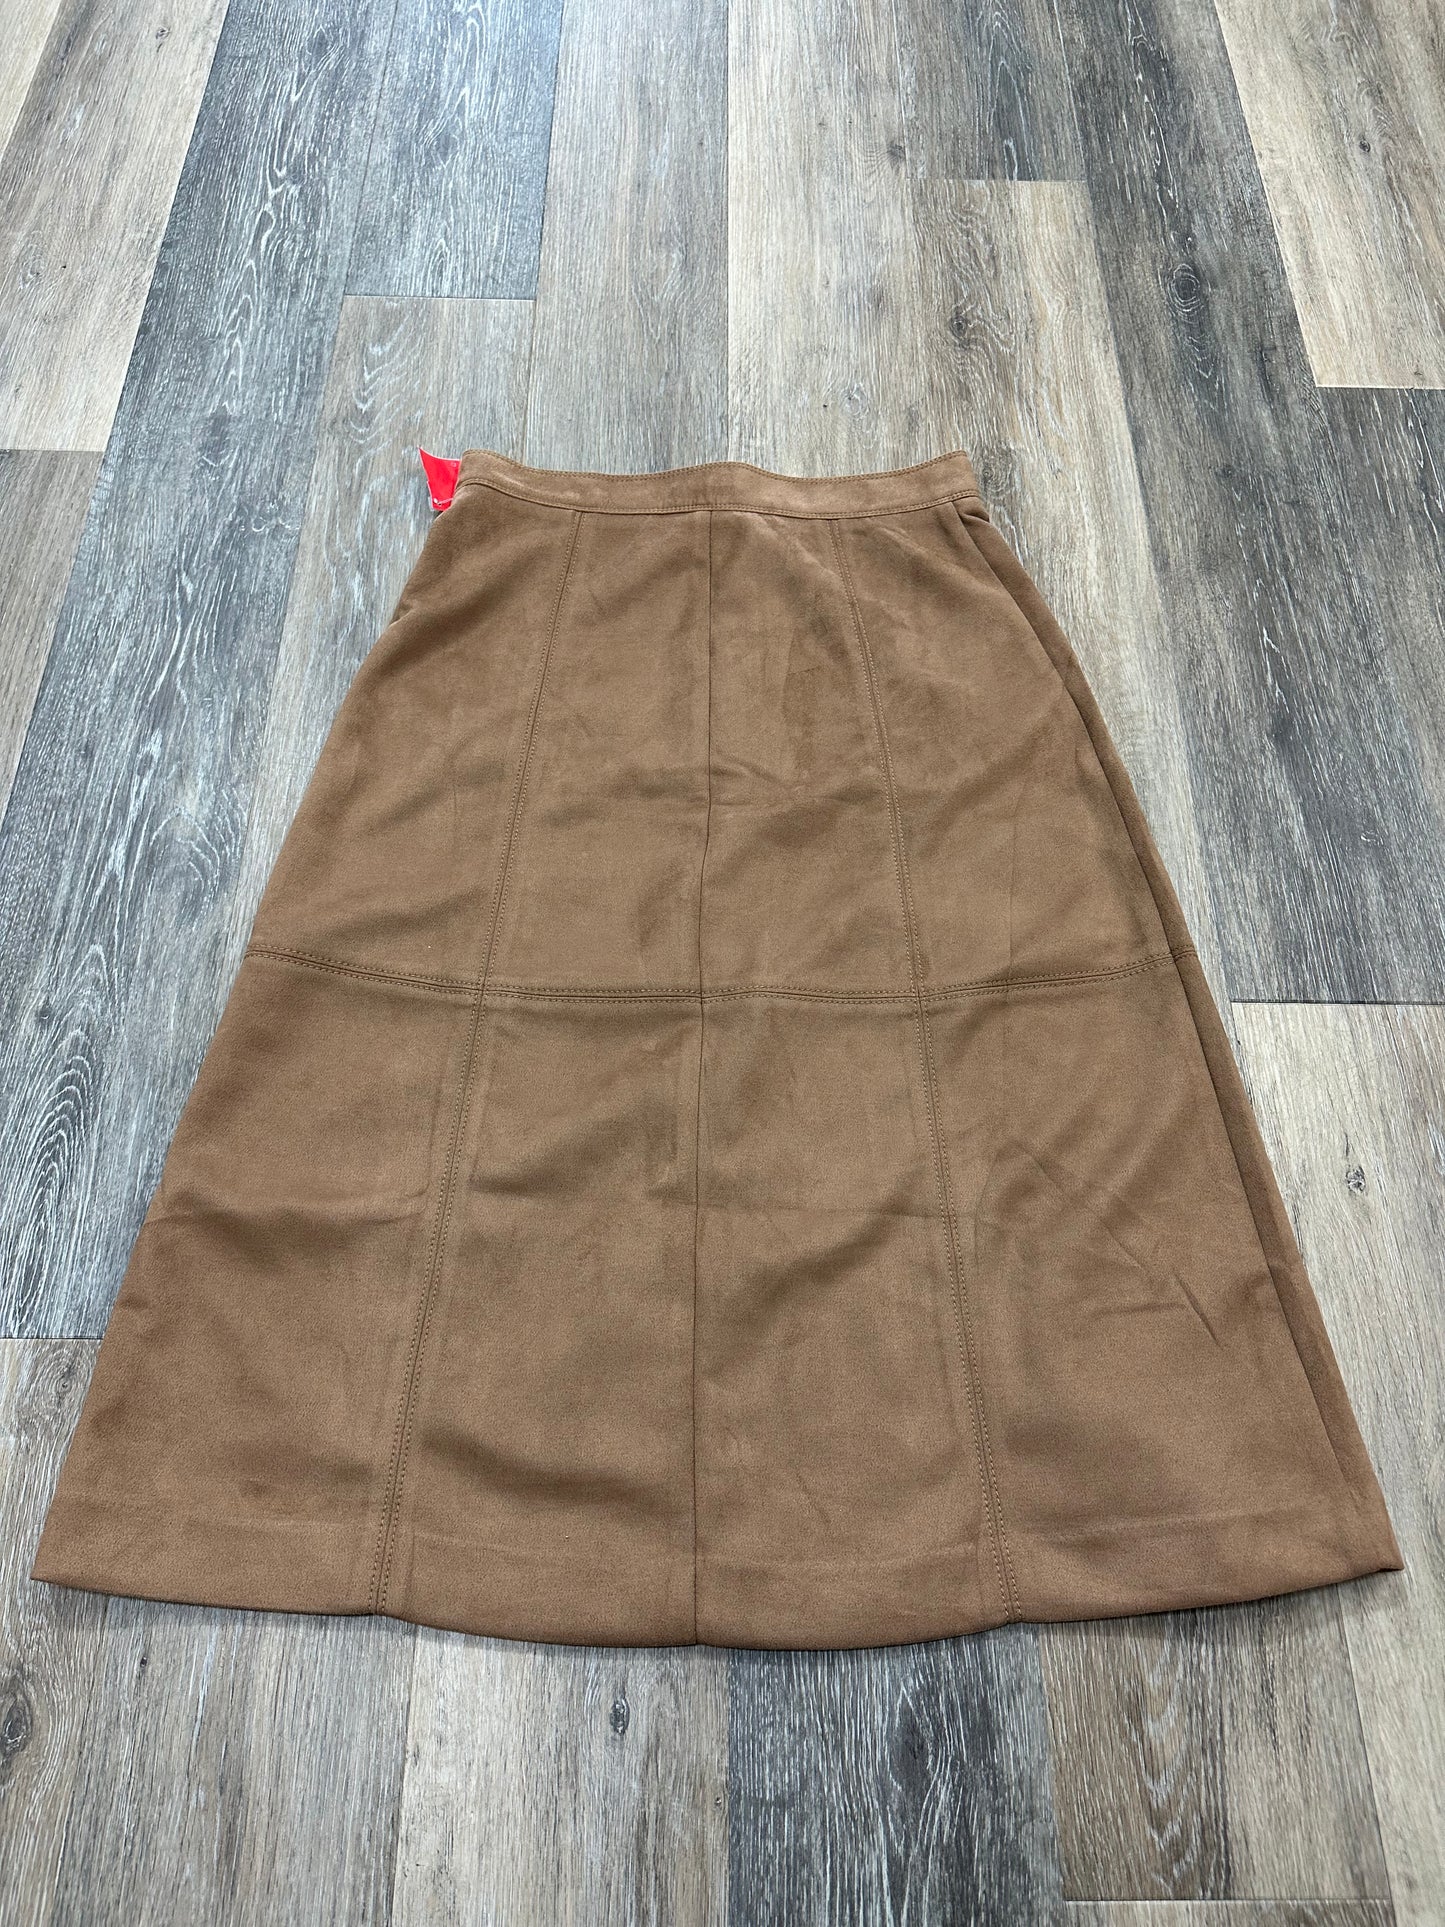 Skirt Maxi By Ann Taylor  Size: 4